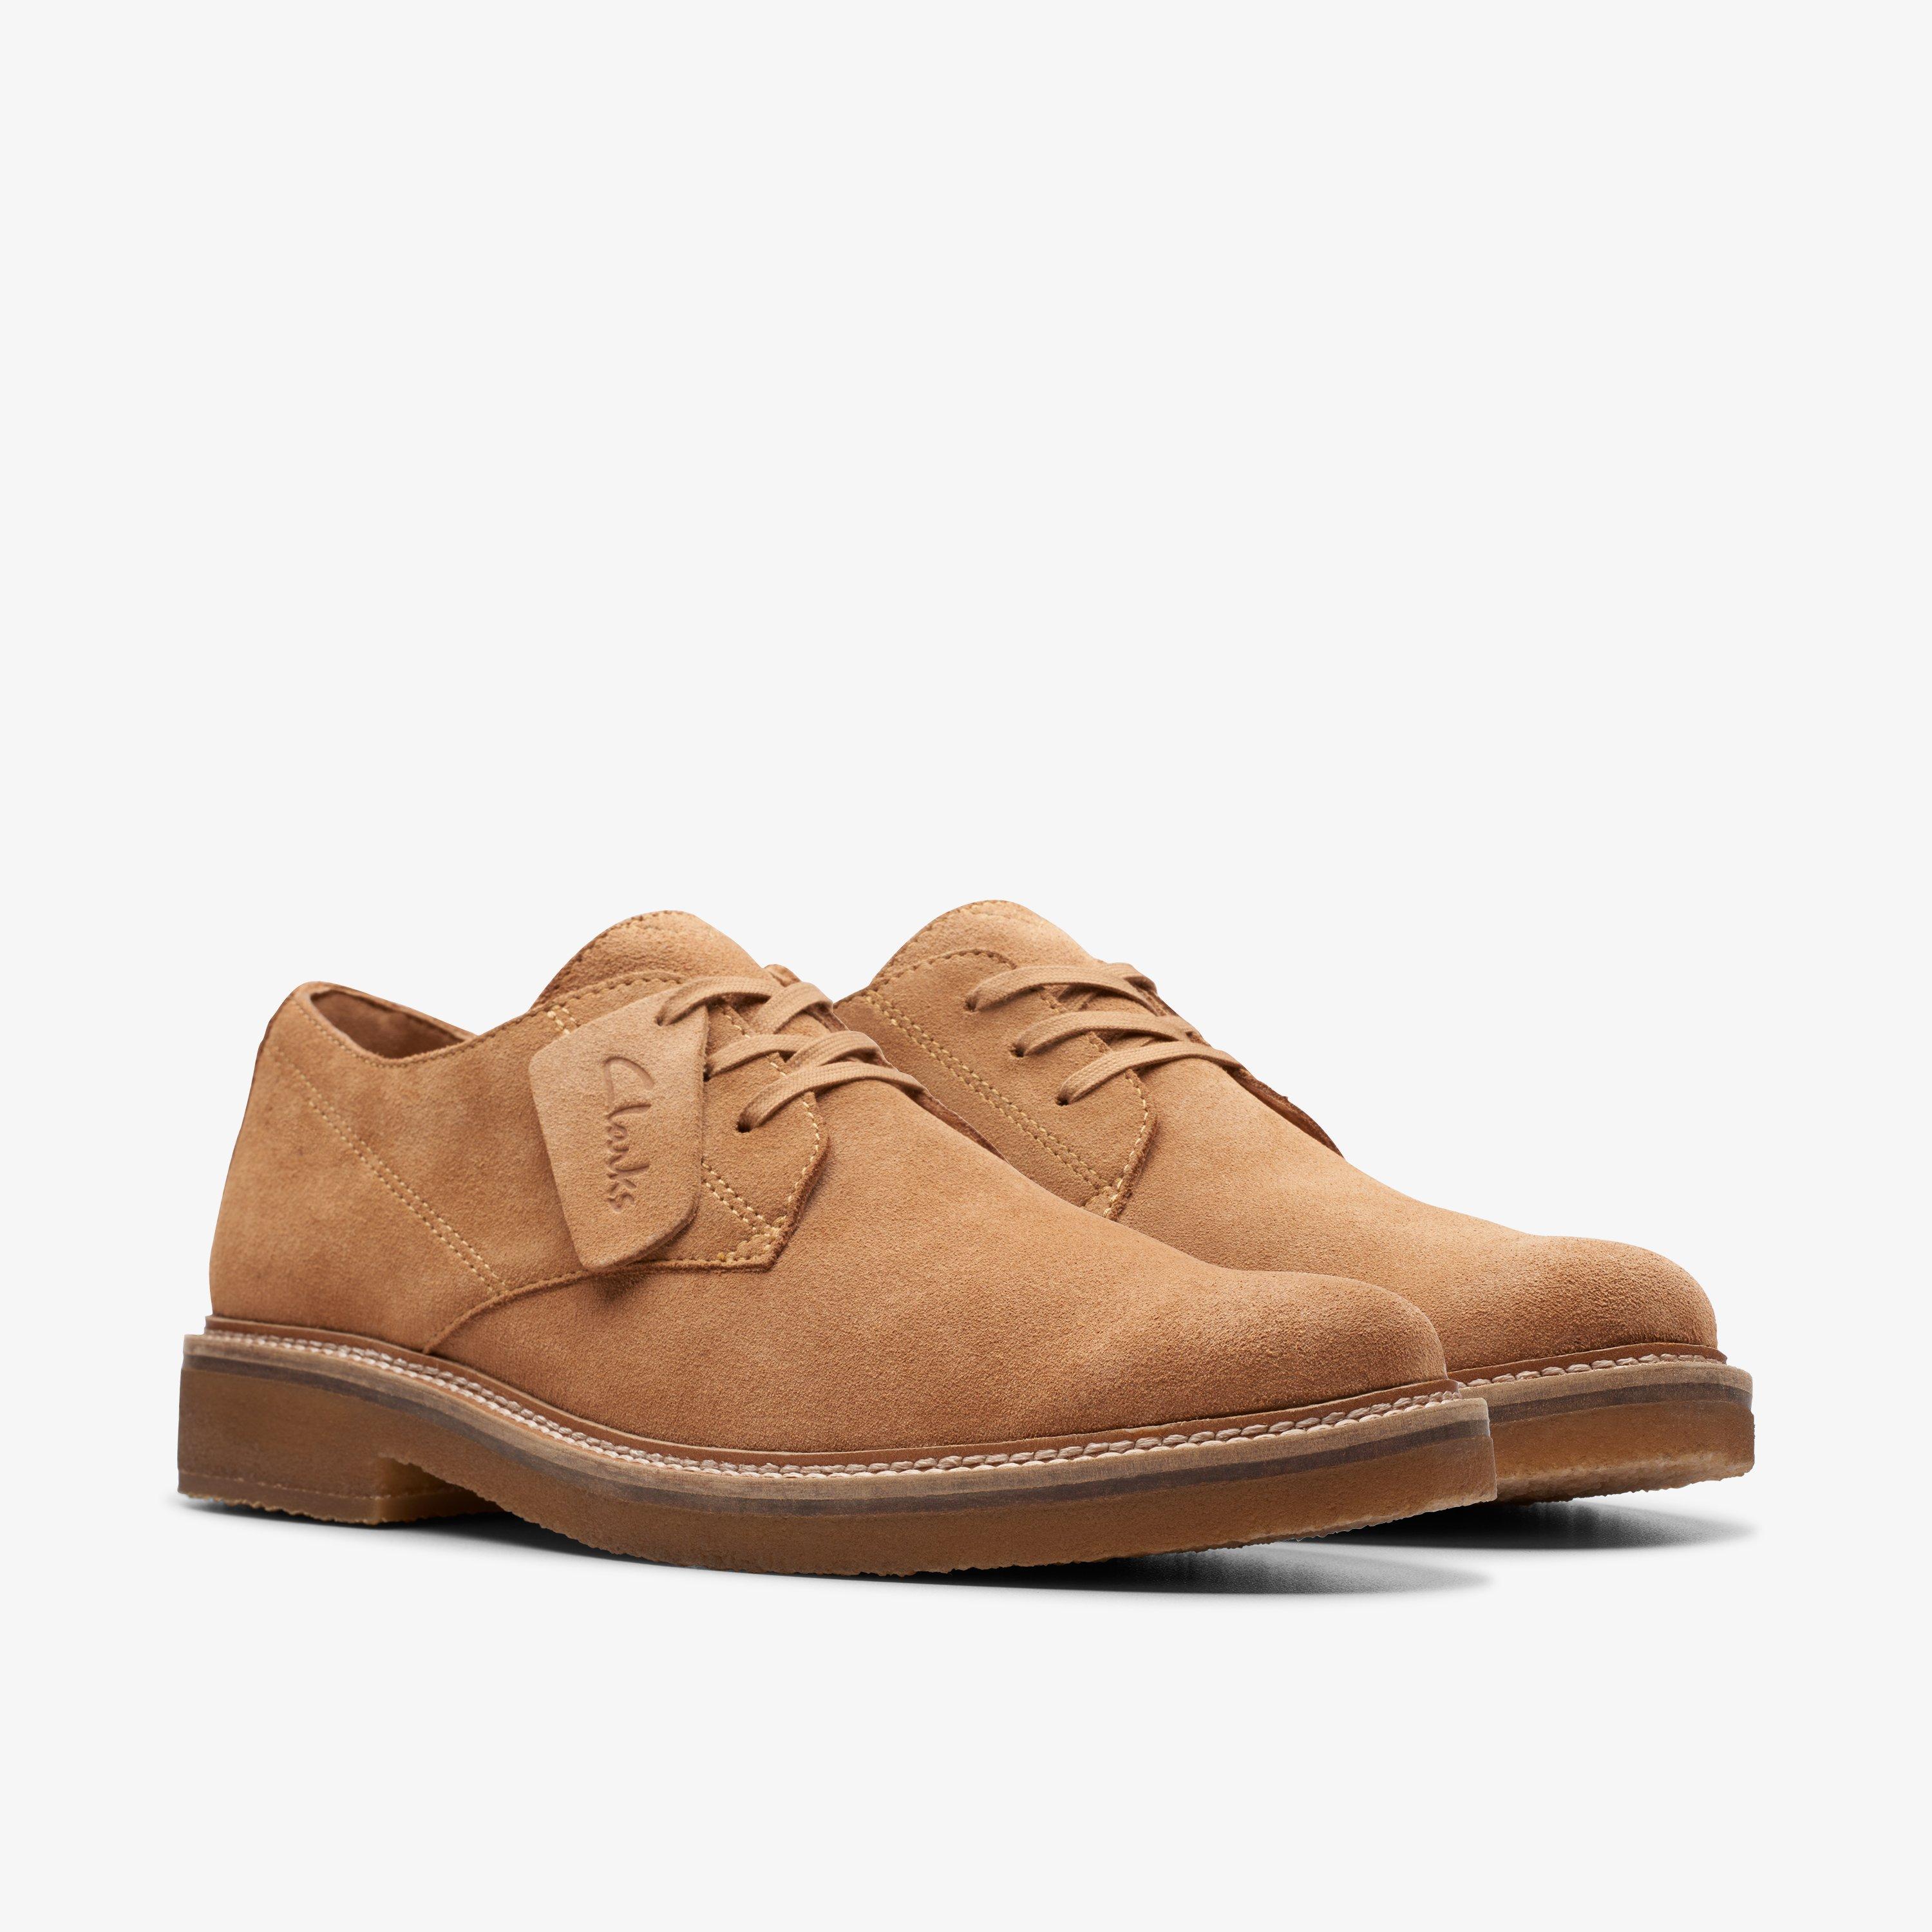 CLARKS | ZAPATOS DERBY HOMBRE | STREETHILL LACE DARK TAN LEATHER | MARRÓN